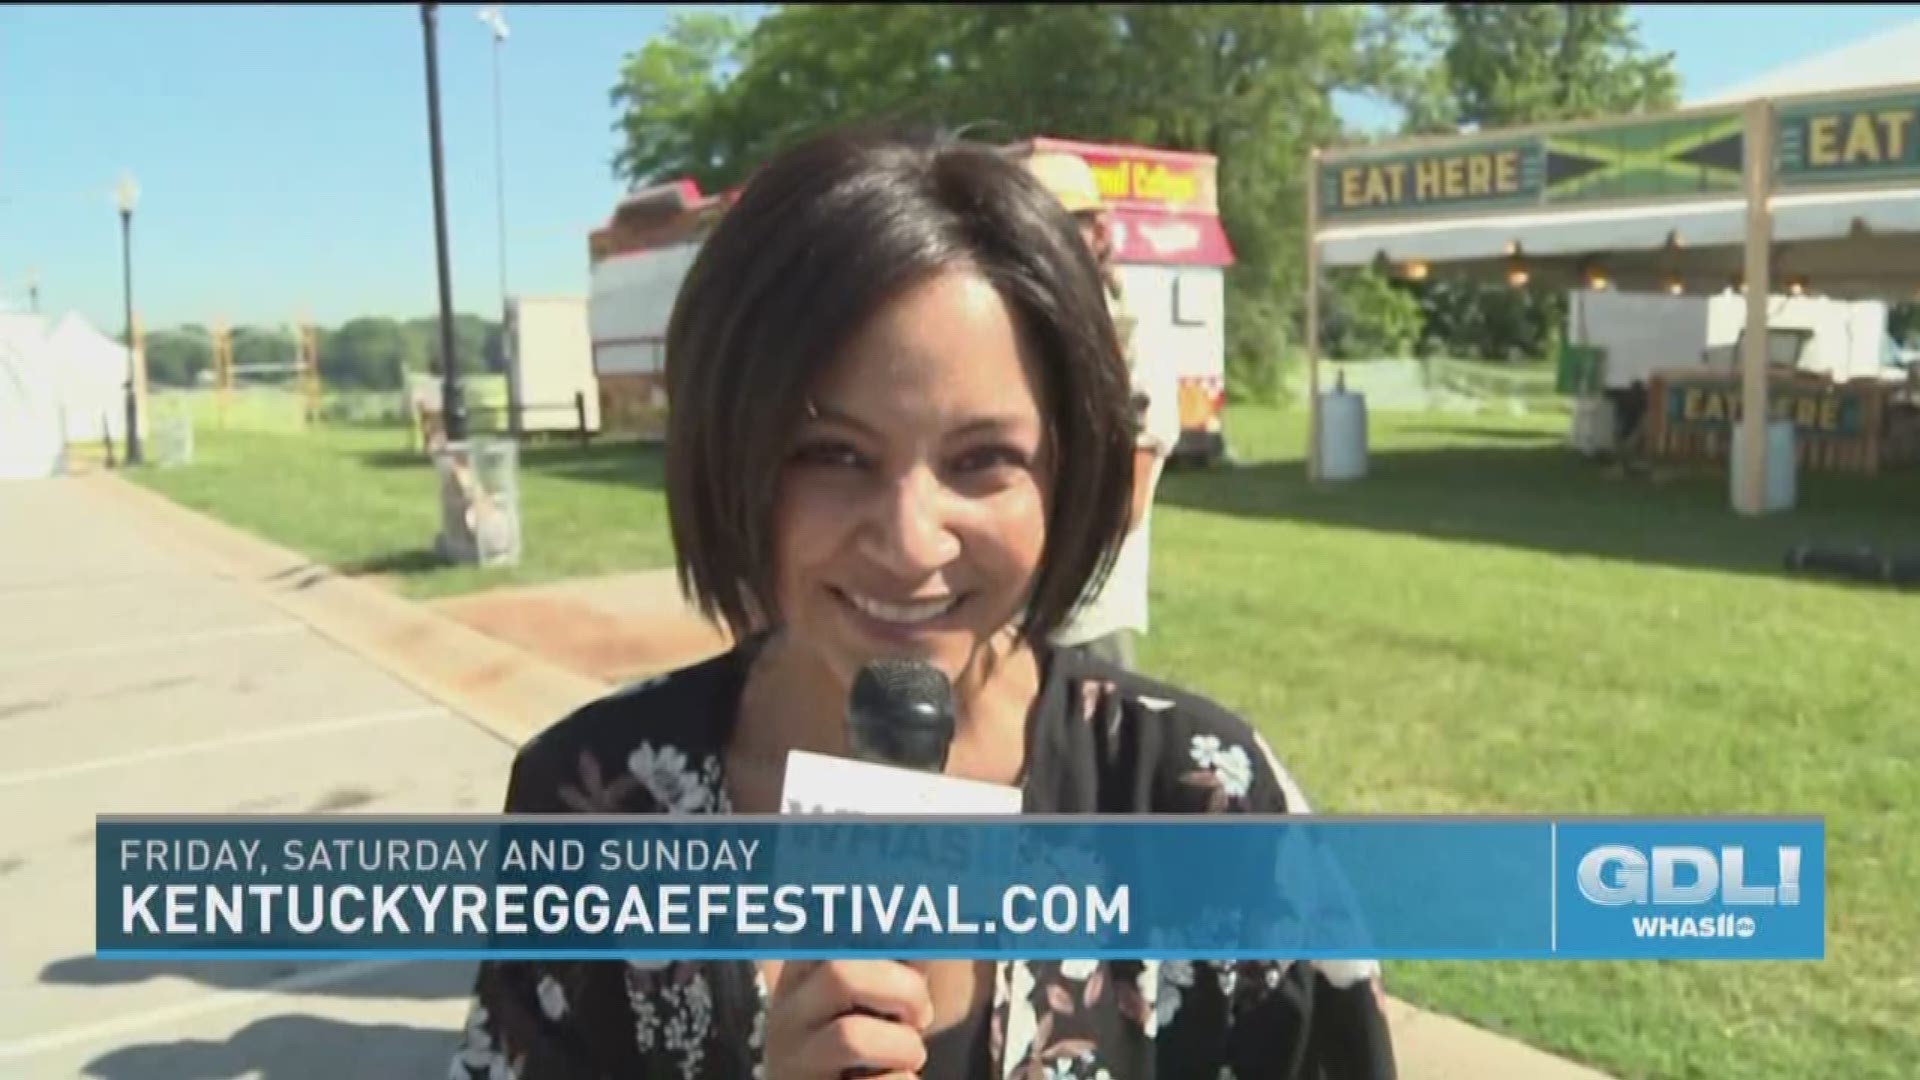 The Kentucky Reggae Festival returns to Louisville Water Tower Park from May 25 - May 27, 2018.